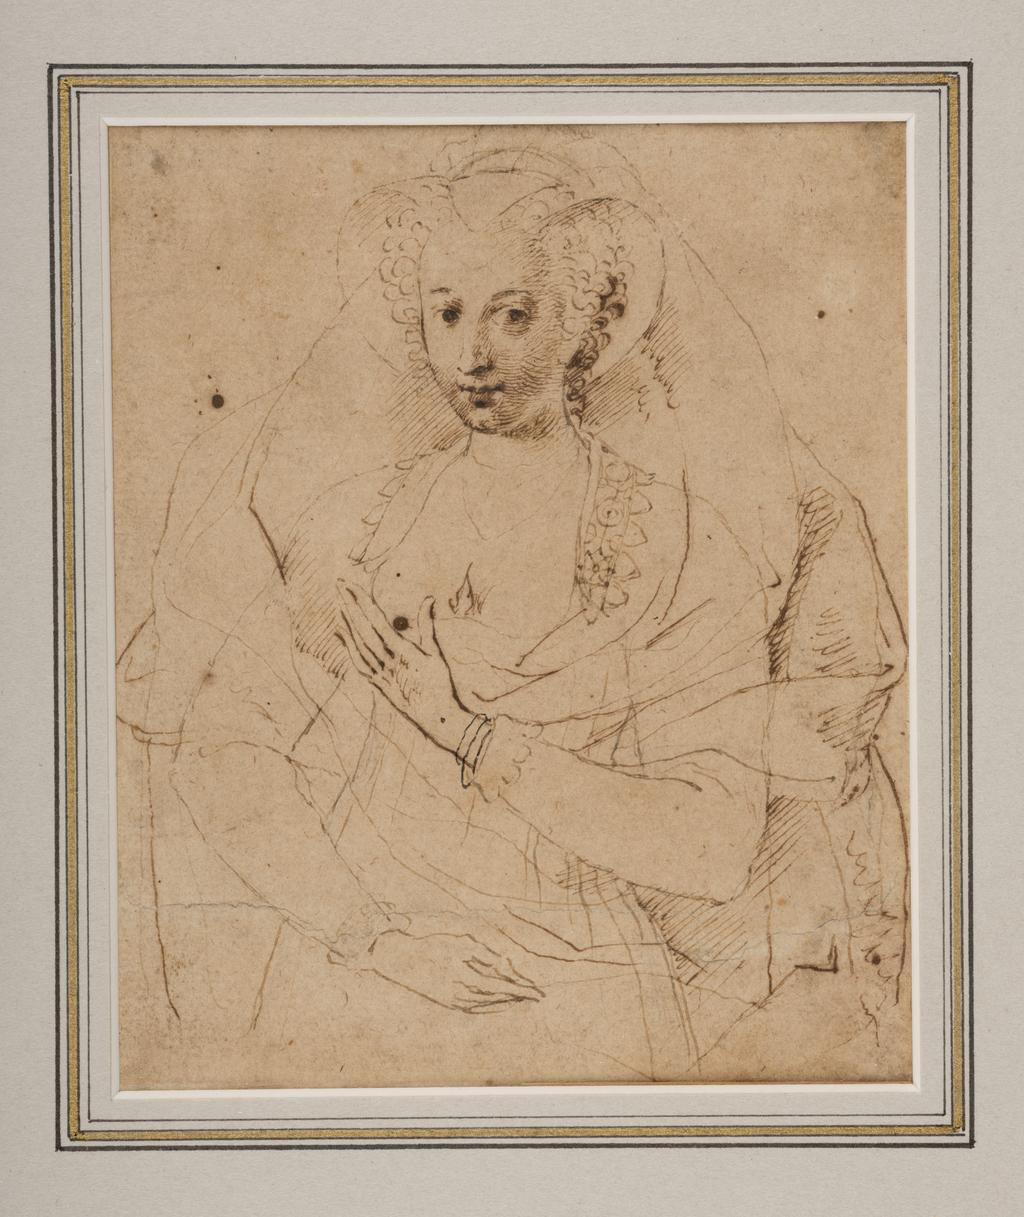 An image of Miniature (painting). Lucy Harington, Countess of Bedford. Unknown Lady. Part of an arm and a hand. Oliver, Isaac I (British, 1556(?)-1617). Recto: pen and brown ink over traces of black chalk verso: black chalk on paper. Height 143 mm, width 117 mm. Notes: This is a preliminary drawing for the miniature of Lucy Harrington, Countess of Bedford, in the Fitzwilliam, no. 3902. Acquisition Credit: From the Marlay Fund.